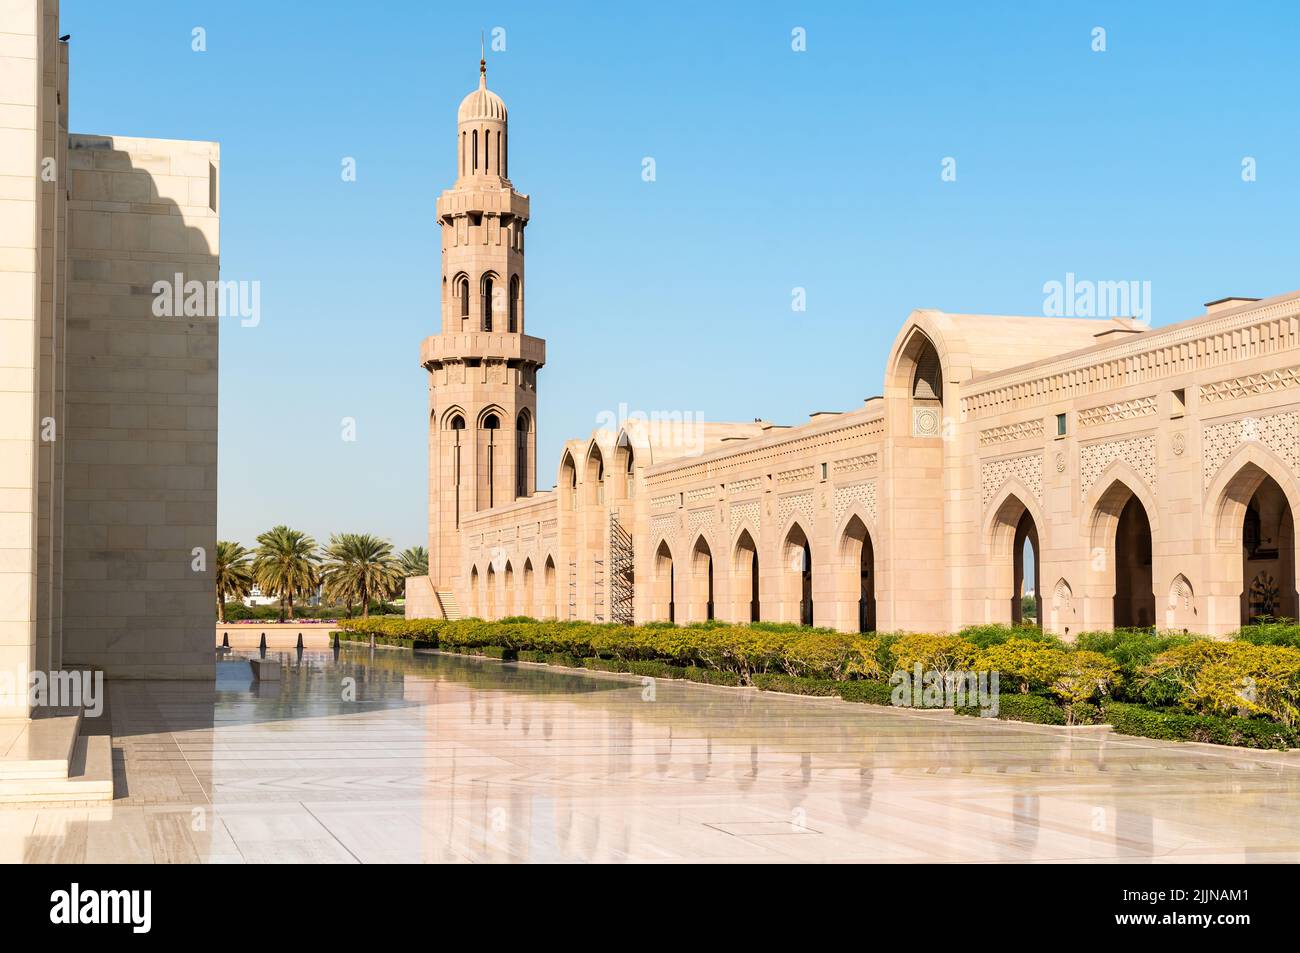 The Sultan Qaboos Grand Mosque in Muscat, Oman, Middle East Stock Photo